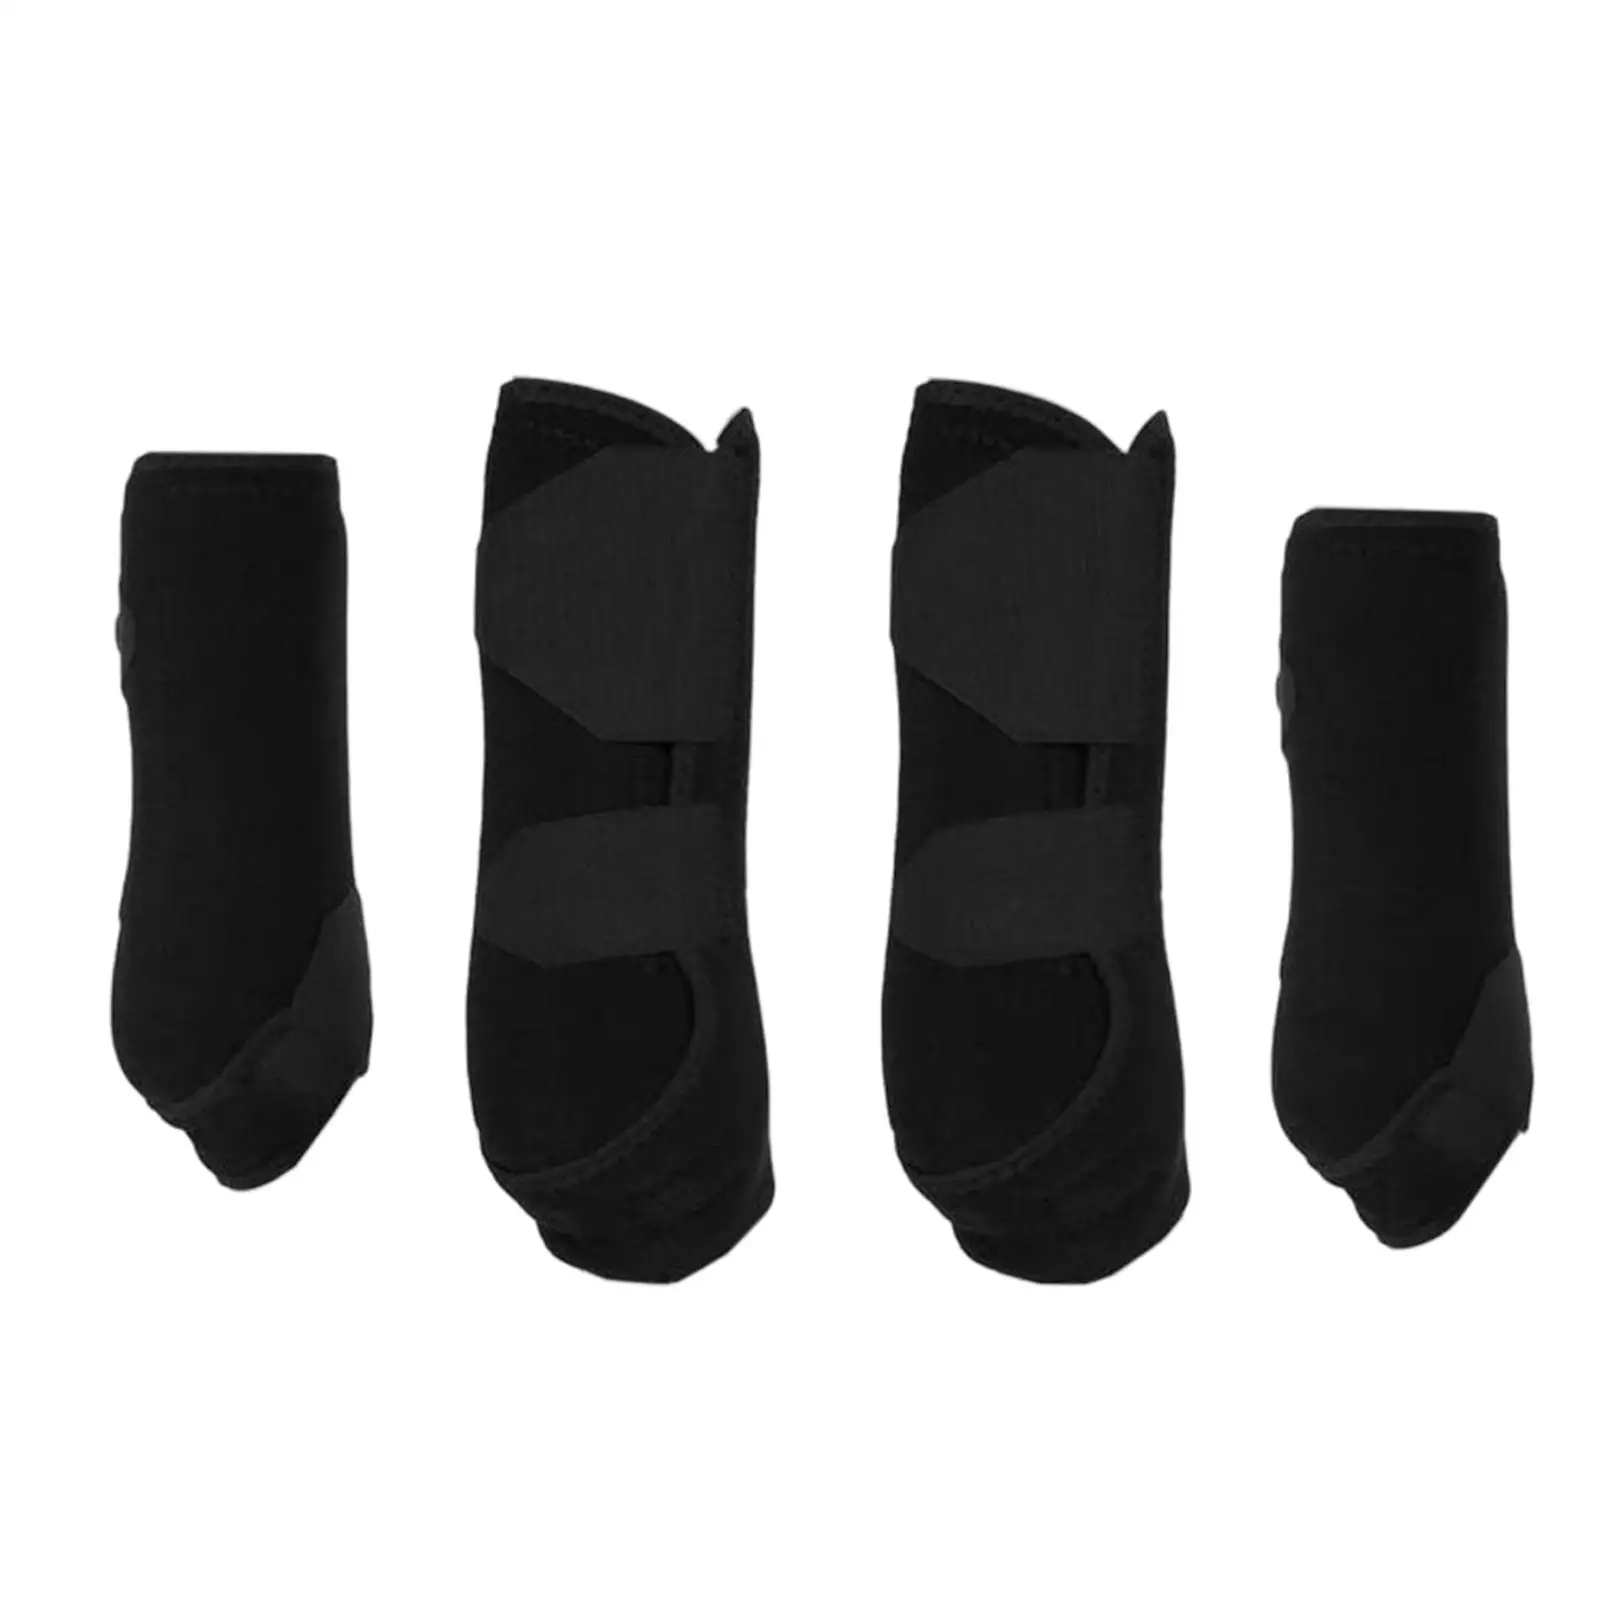 4Pcs Neoprene Horse Boots Leg Wraps Shockproof Tendon Protection Protector Leg Guard for Jumping Training Equestrian Equipment